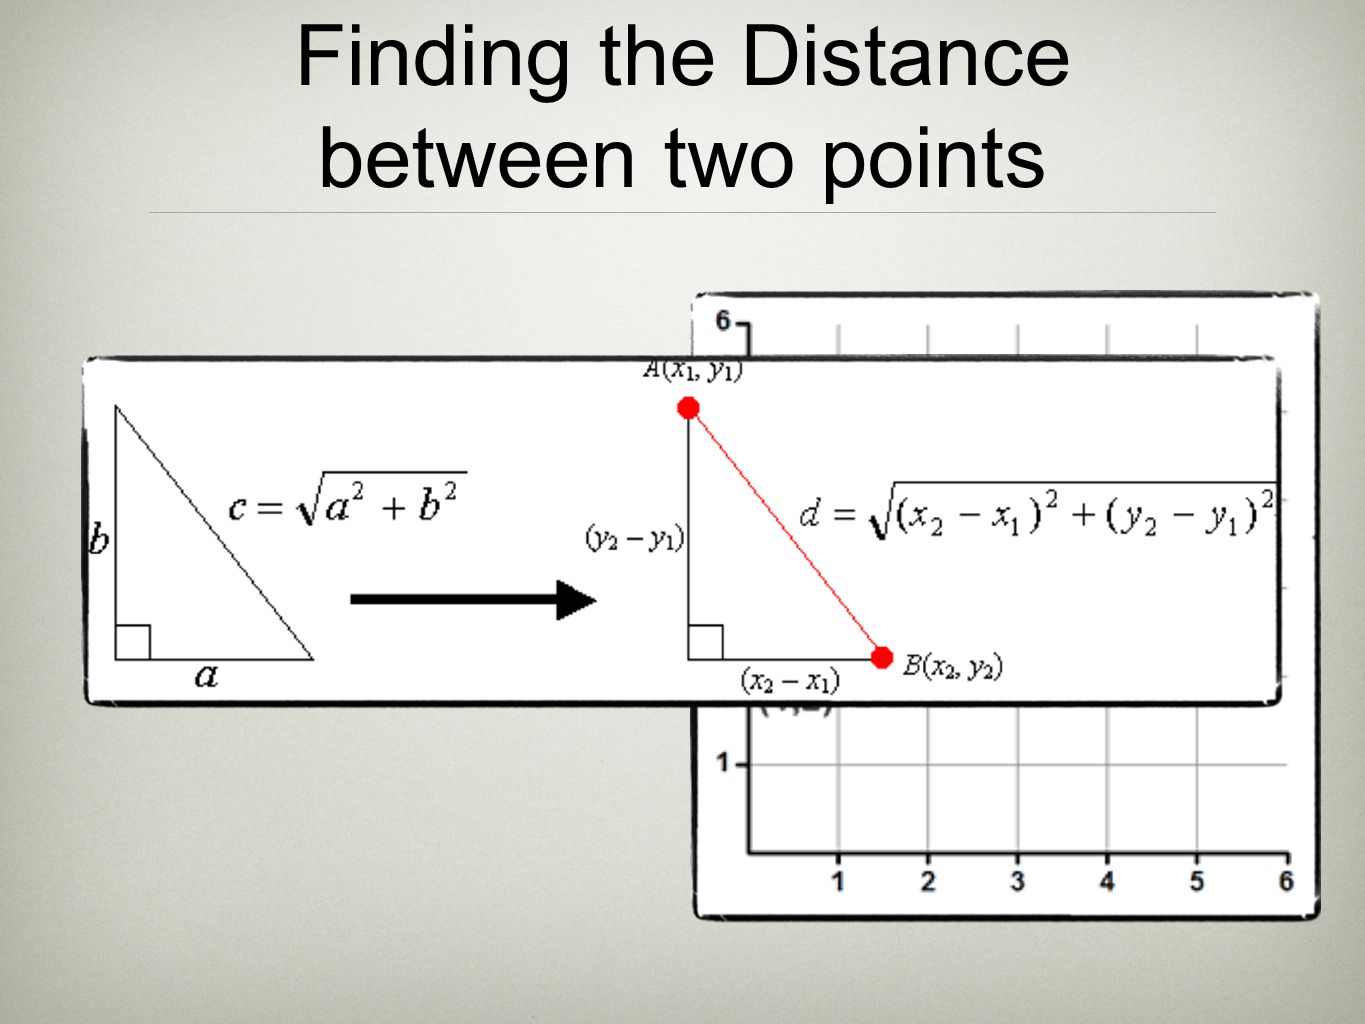 Finding the Distance between two points